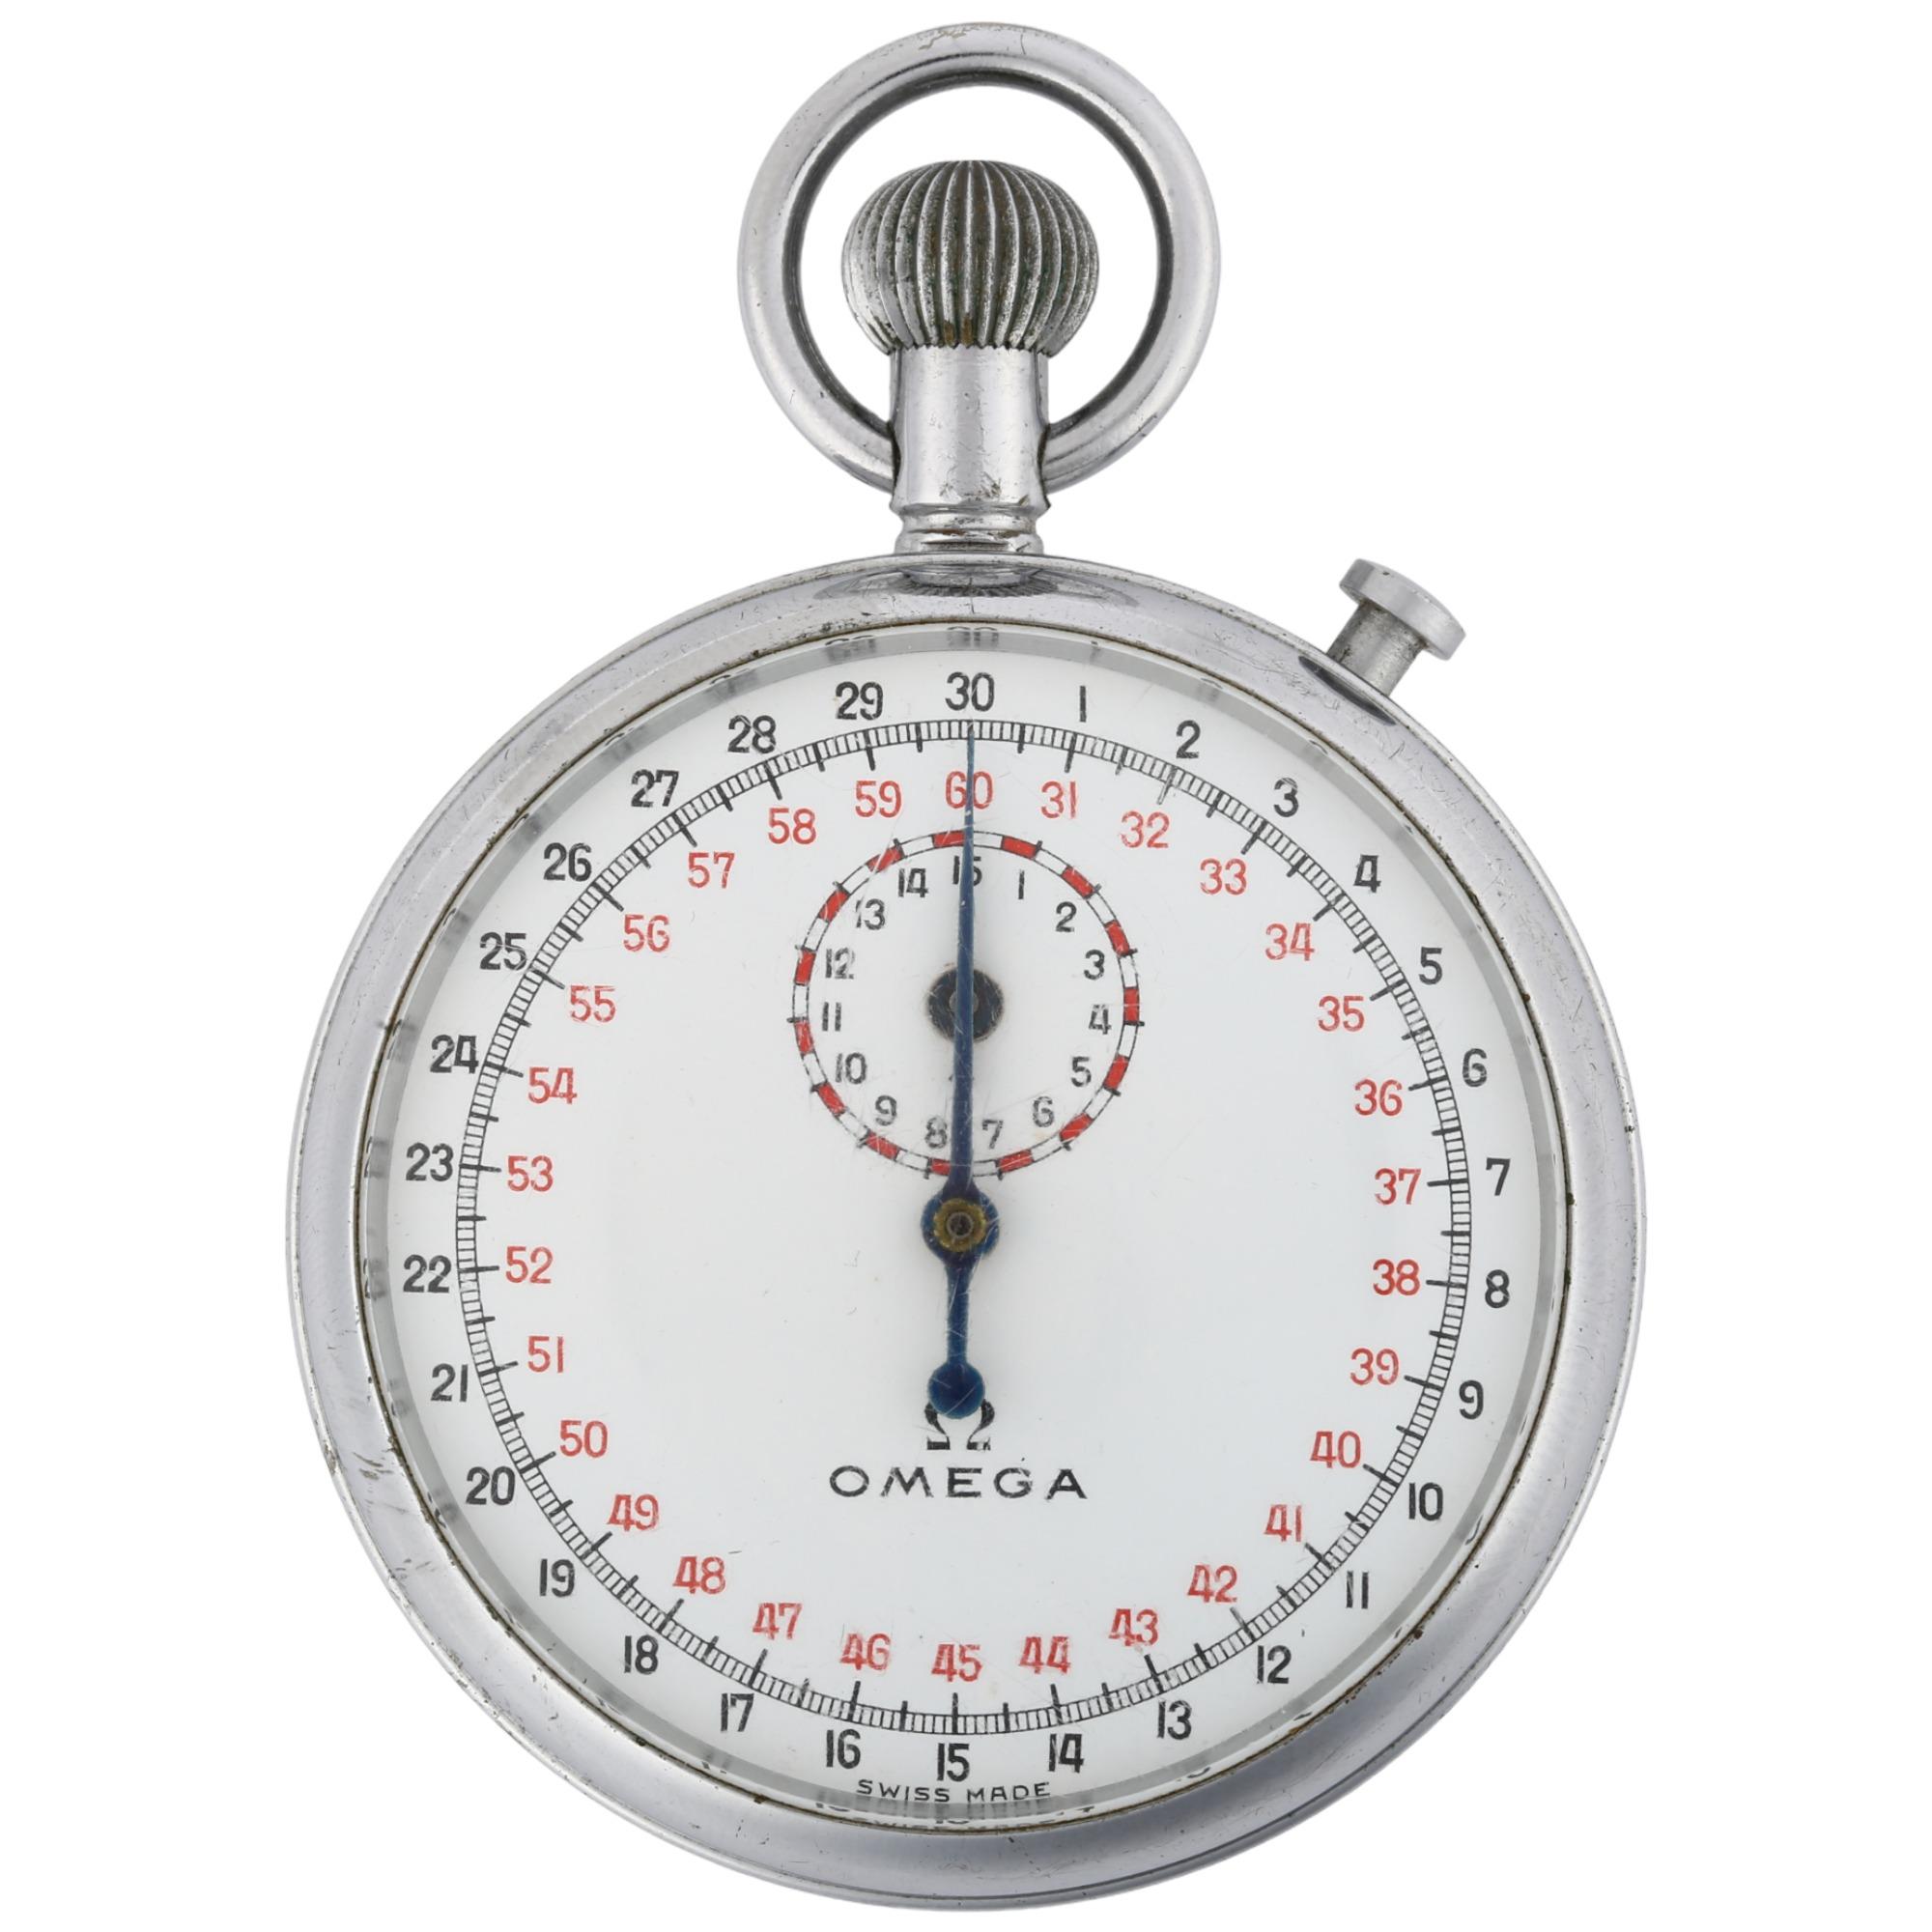 OMEGA - a chrome plated open-face stopwatch, circa 1960s, white dial with Arabic numerals and